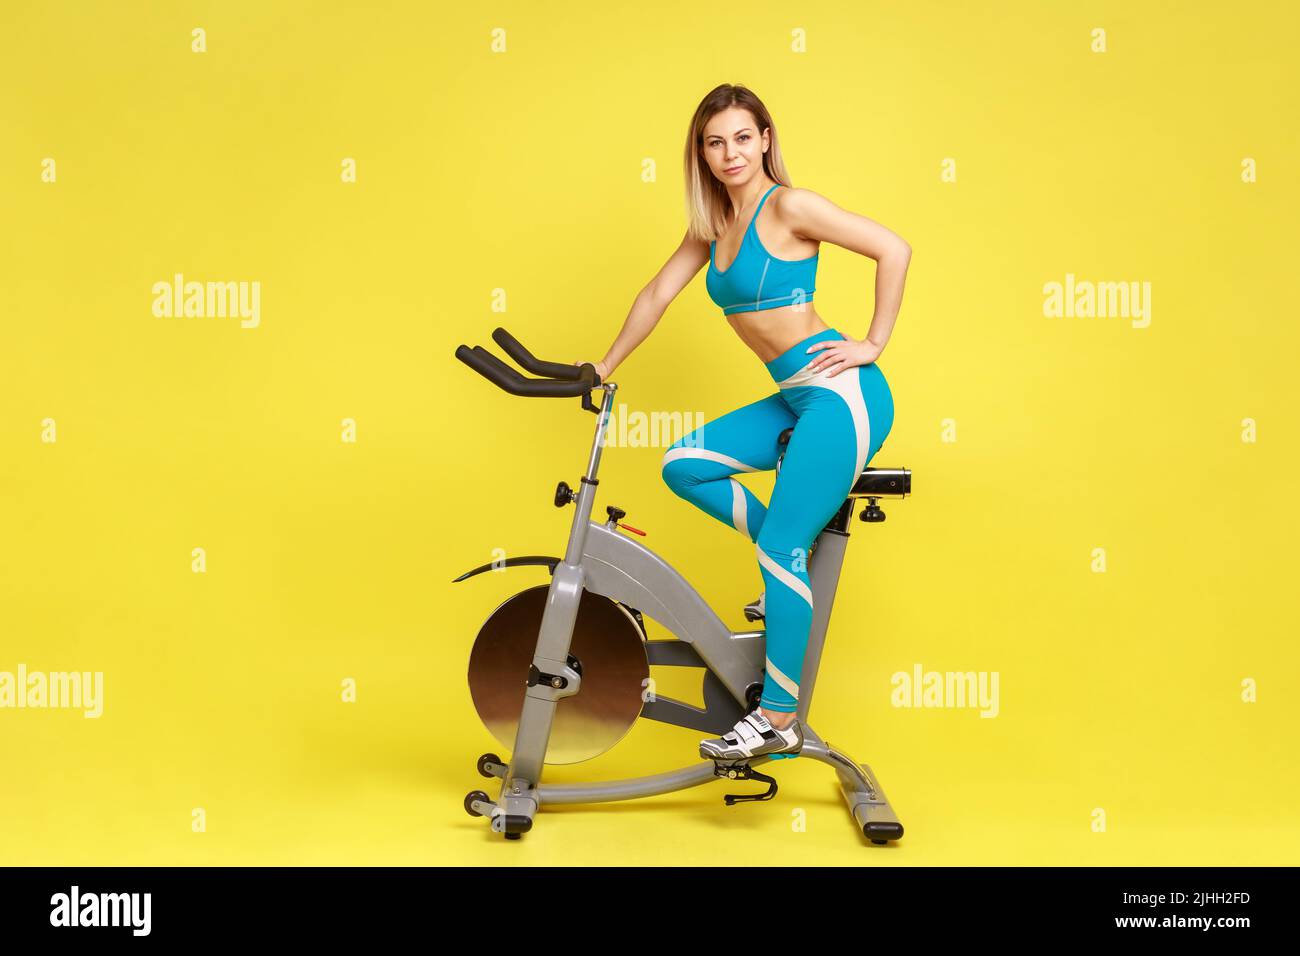 Full length portrait of confident blonde sporty woman on exercise bike, keeping hand on hip, looking at camera, wearing blue sportswear. Indoor studio shot isolated on yellow background. Stock Photo